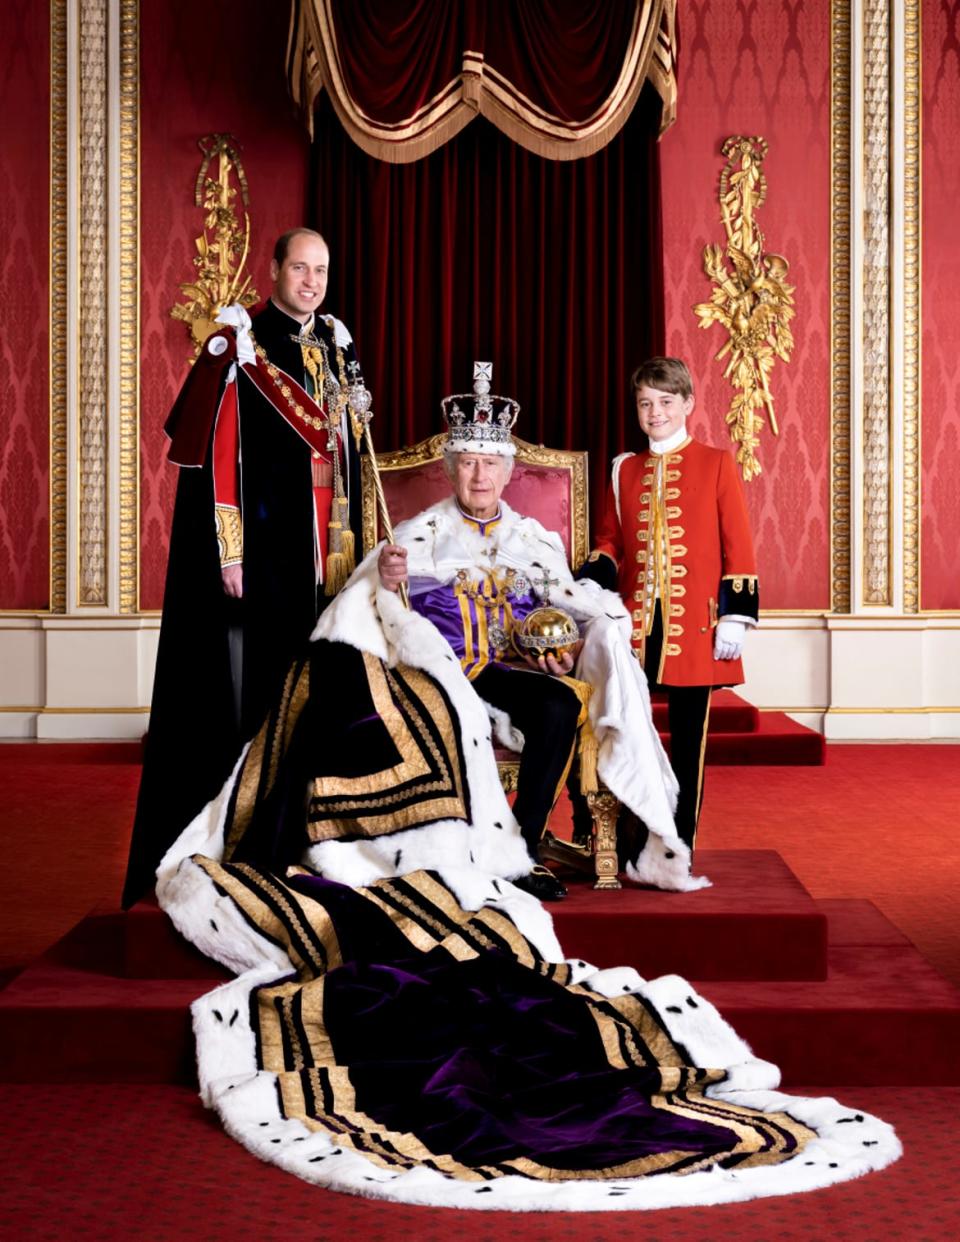 <div class="inline-image__caption"><p>King Charles III, Prince William, Prince of Wales, and Prince George pose on the day of the coronation in the Throne Room at Buckingham Palace, London, Britain, in this handout picture obtained by Reuters on May 12, 2023.</p></div> <div class="inline-image__credit">Hugo Burnand/Royal Household 2023/Handout via REUTERS</div>